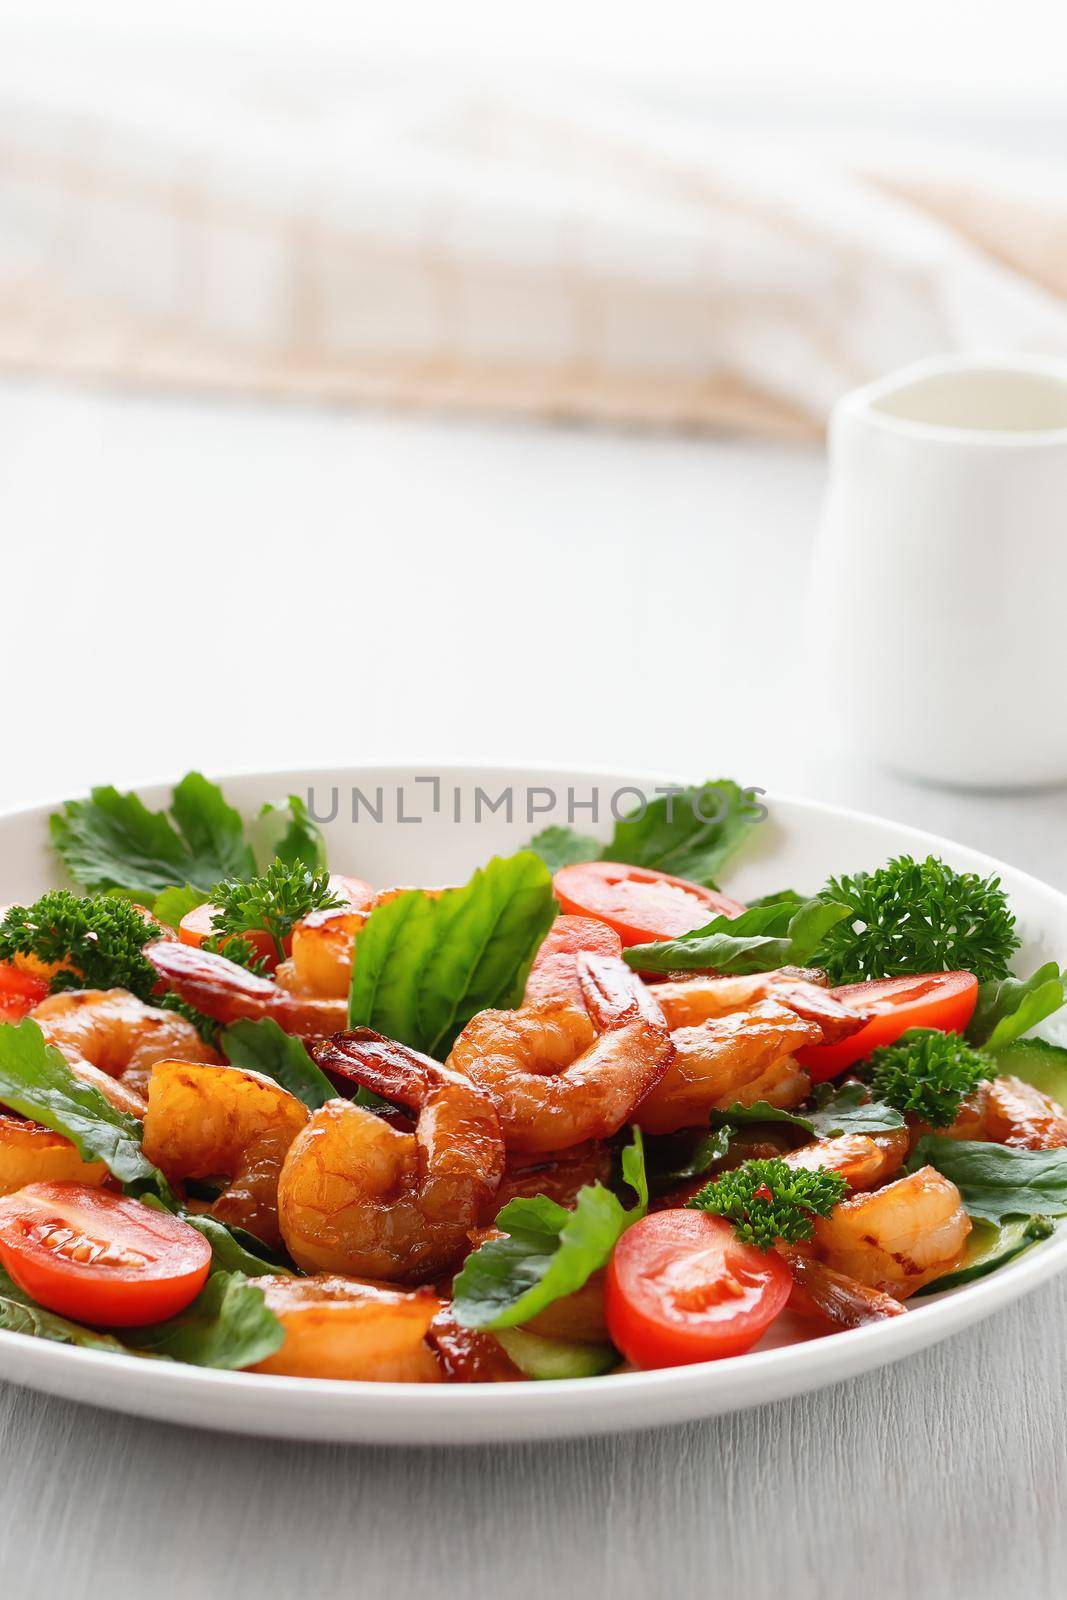 Fresh salad of shrimps, tomatoes, arugula and herbs on a white plate. vertical image by galsand